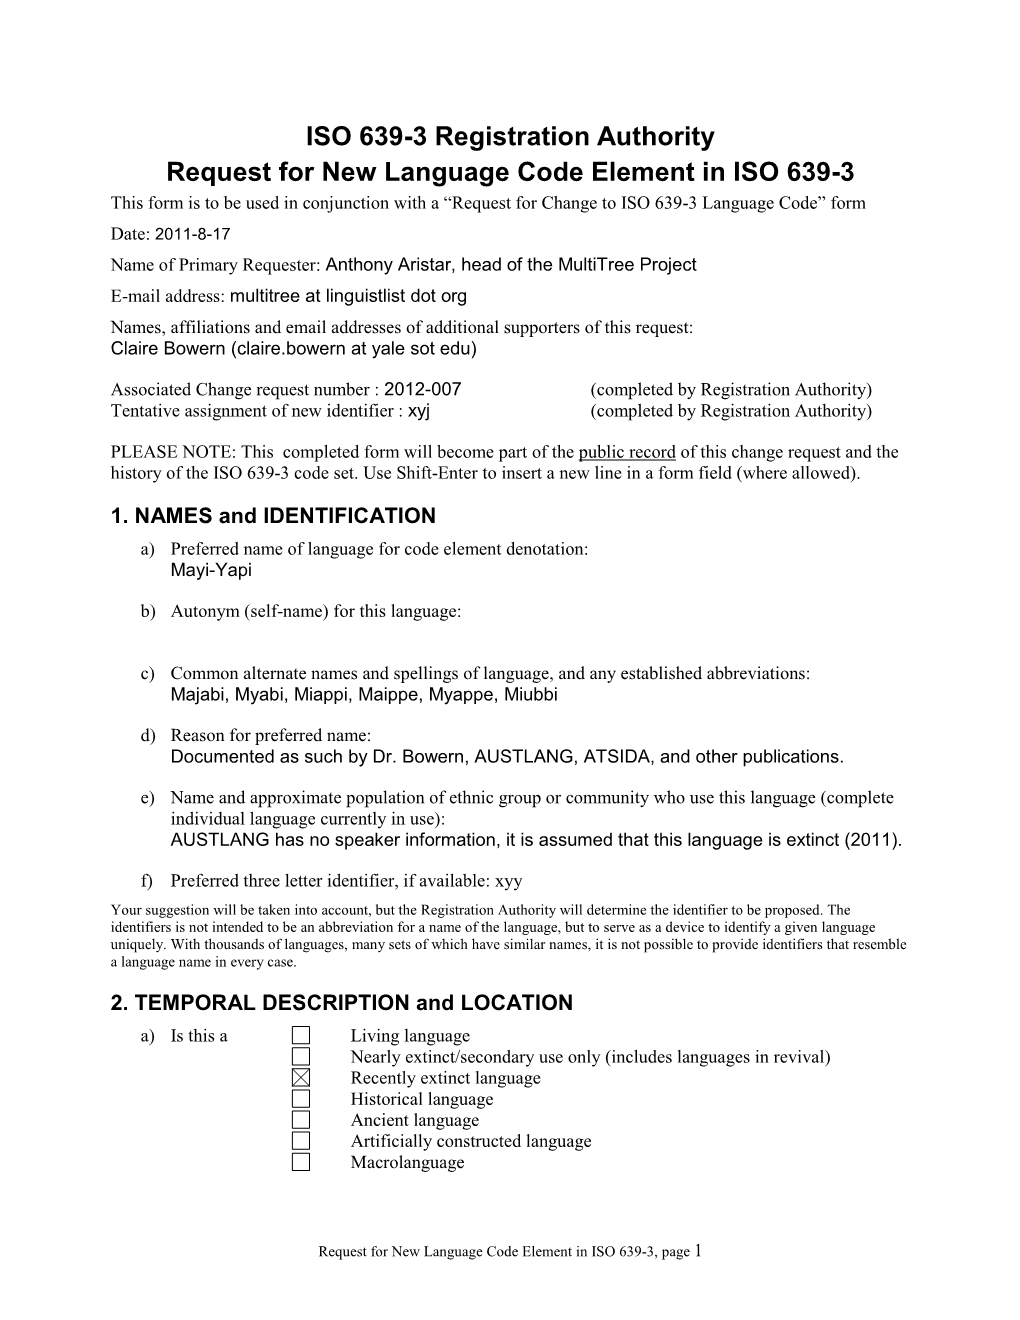 ISO 639-3 Registration Authority Request for New Language Code